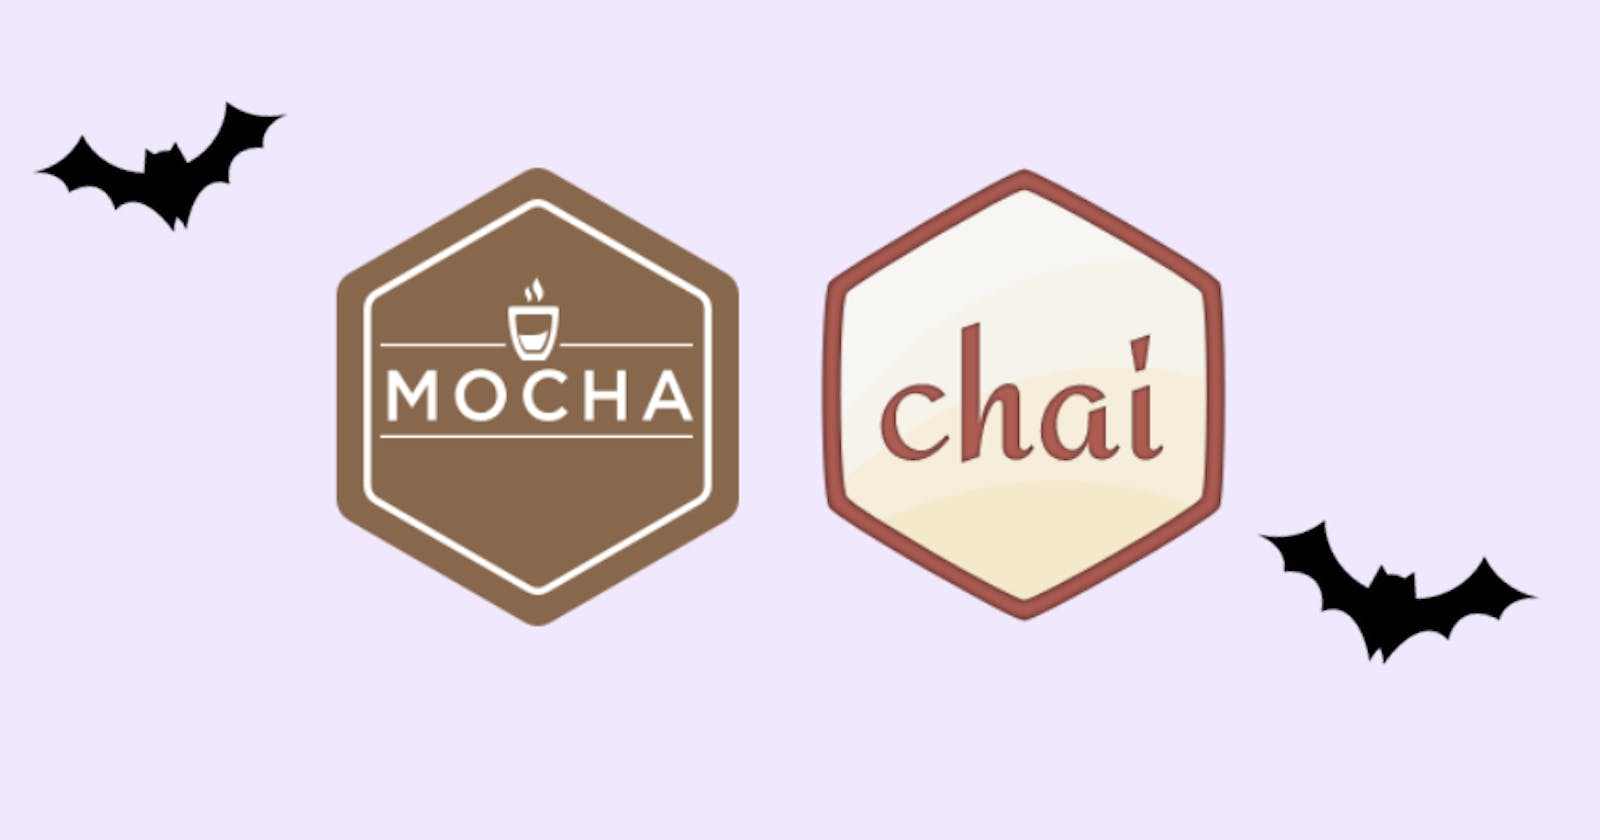 Testing with Mocha and Chai